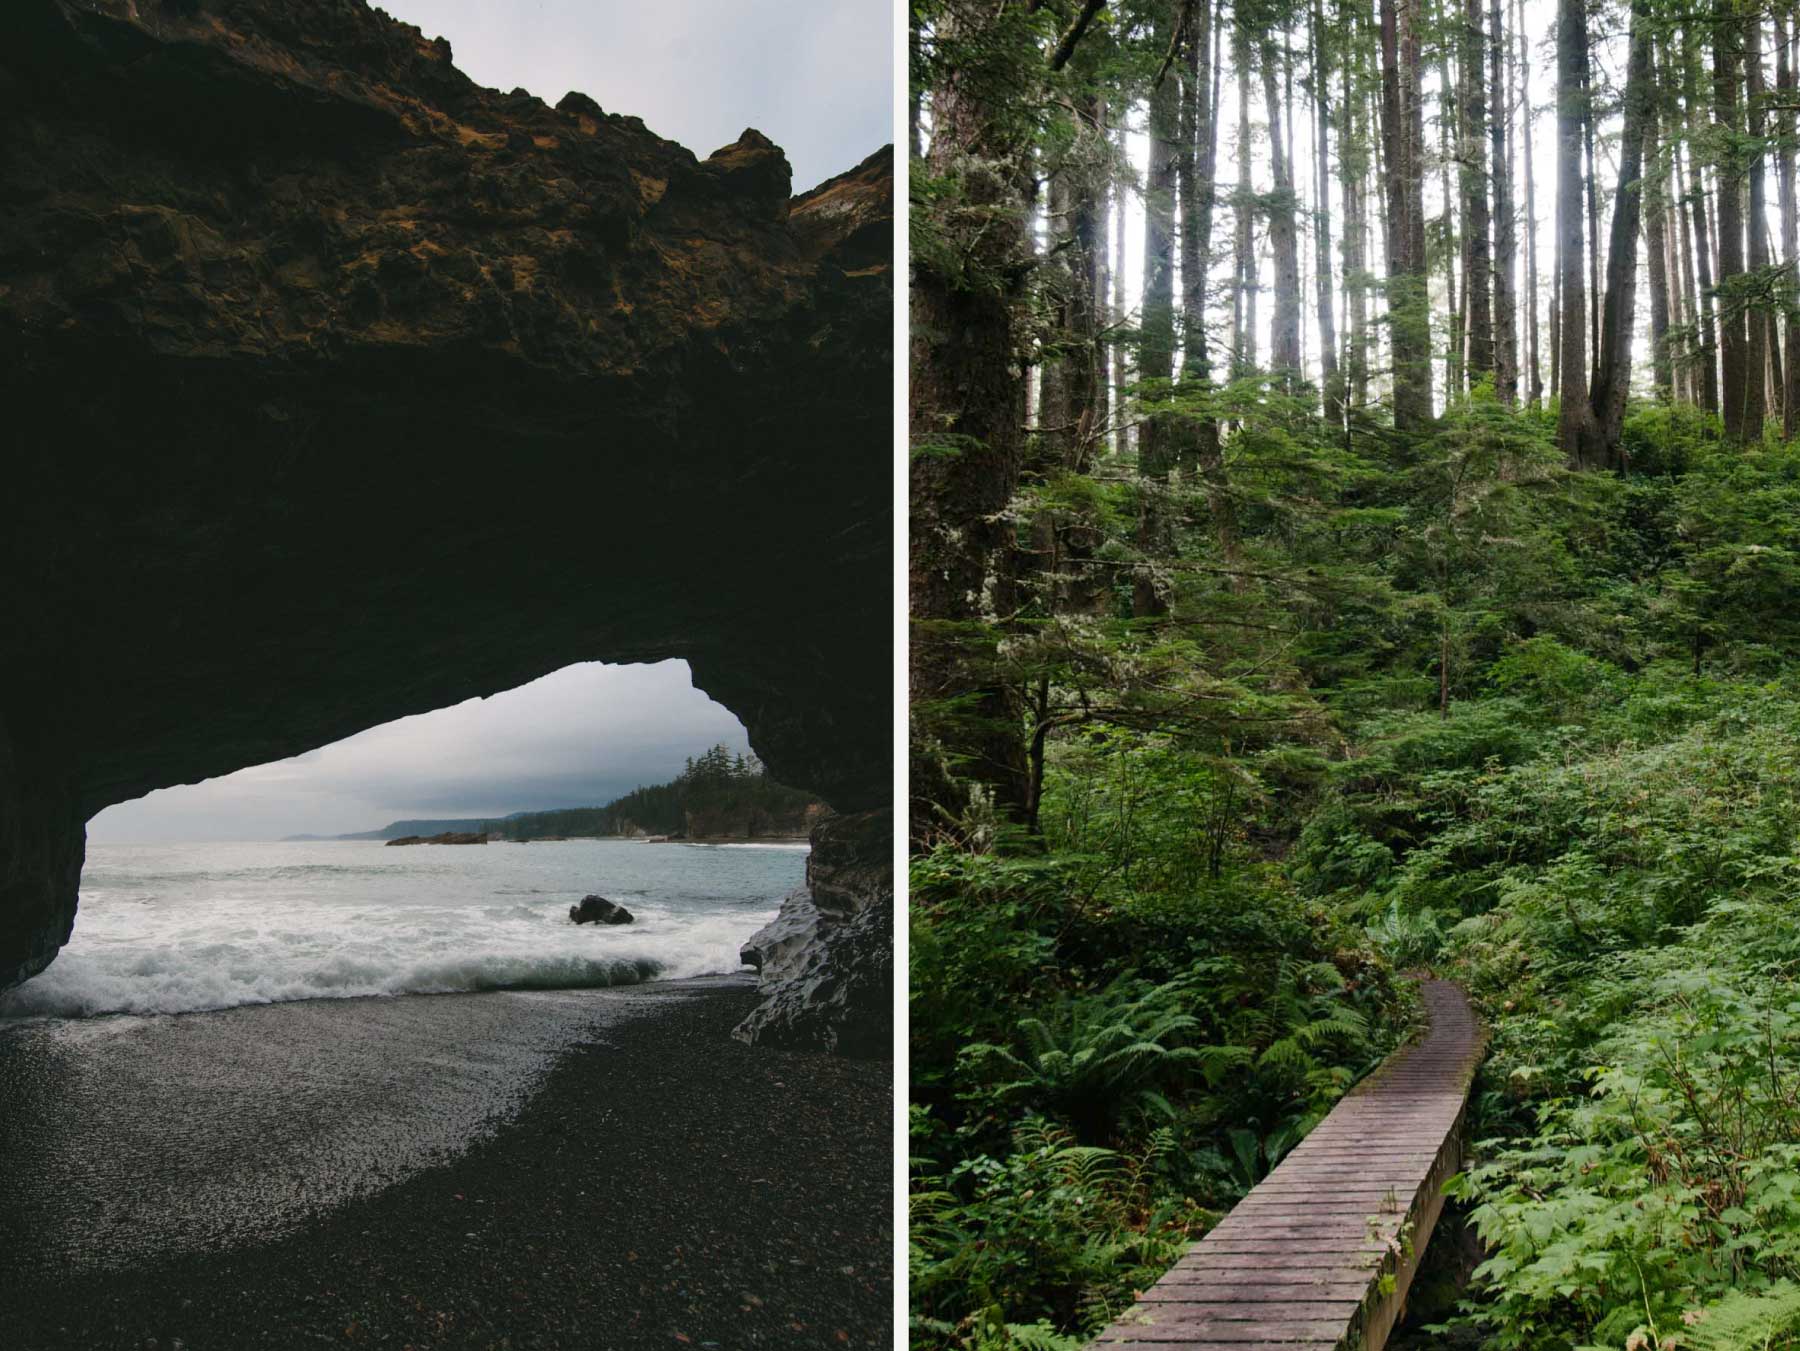 Through sea caves and dark forest tunnels on the West Coast Trail